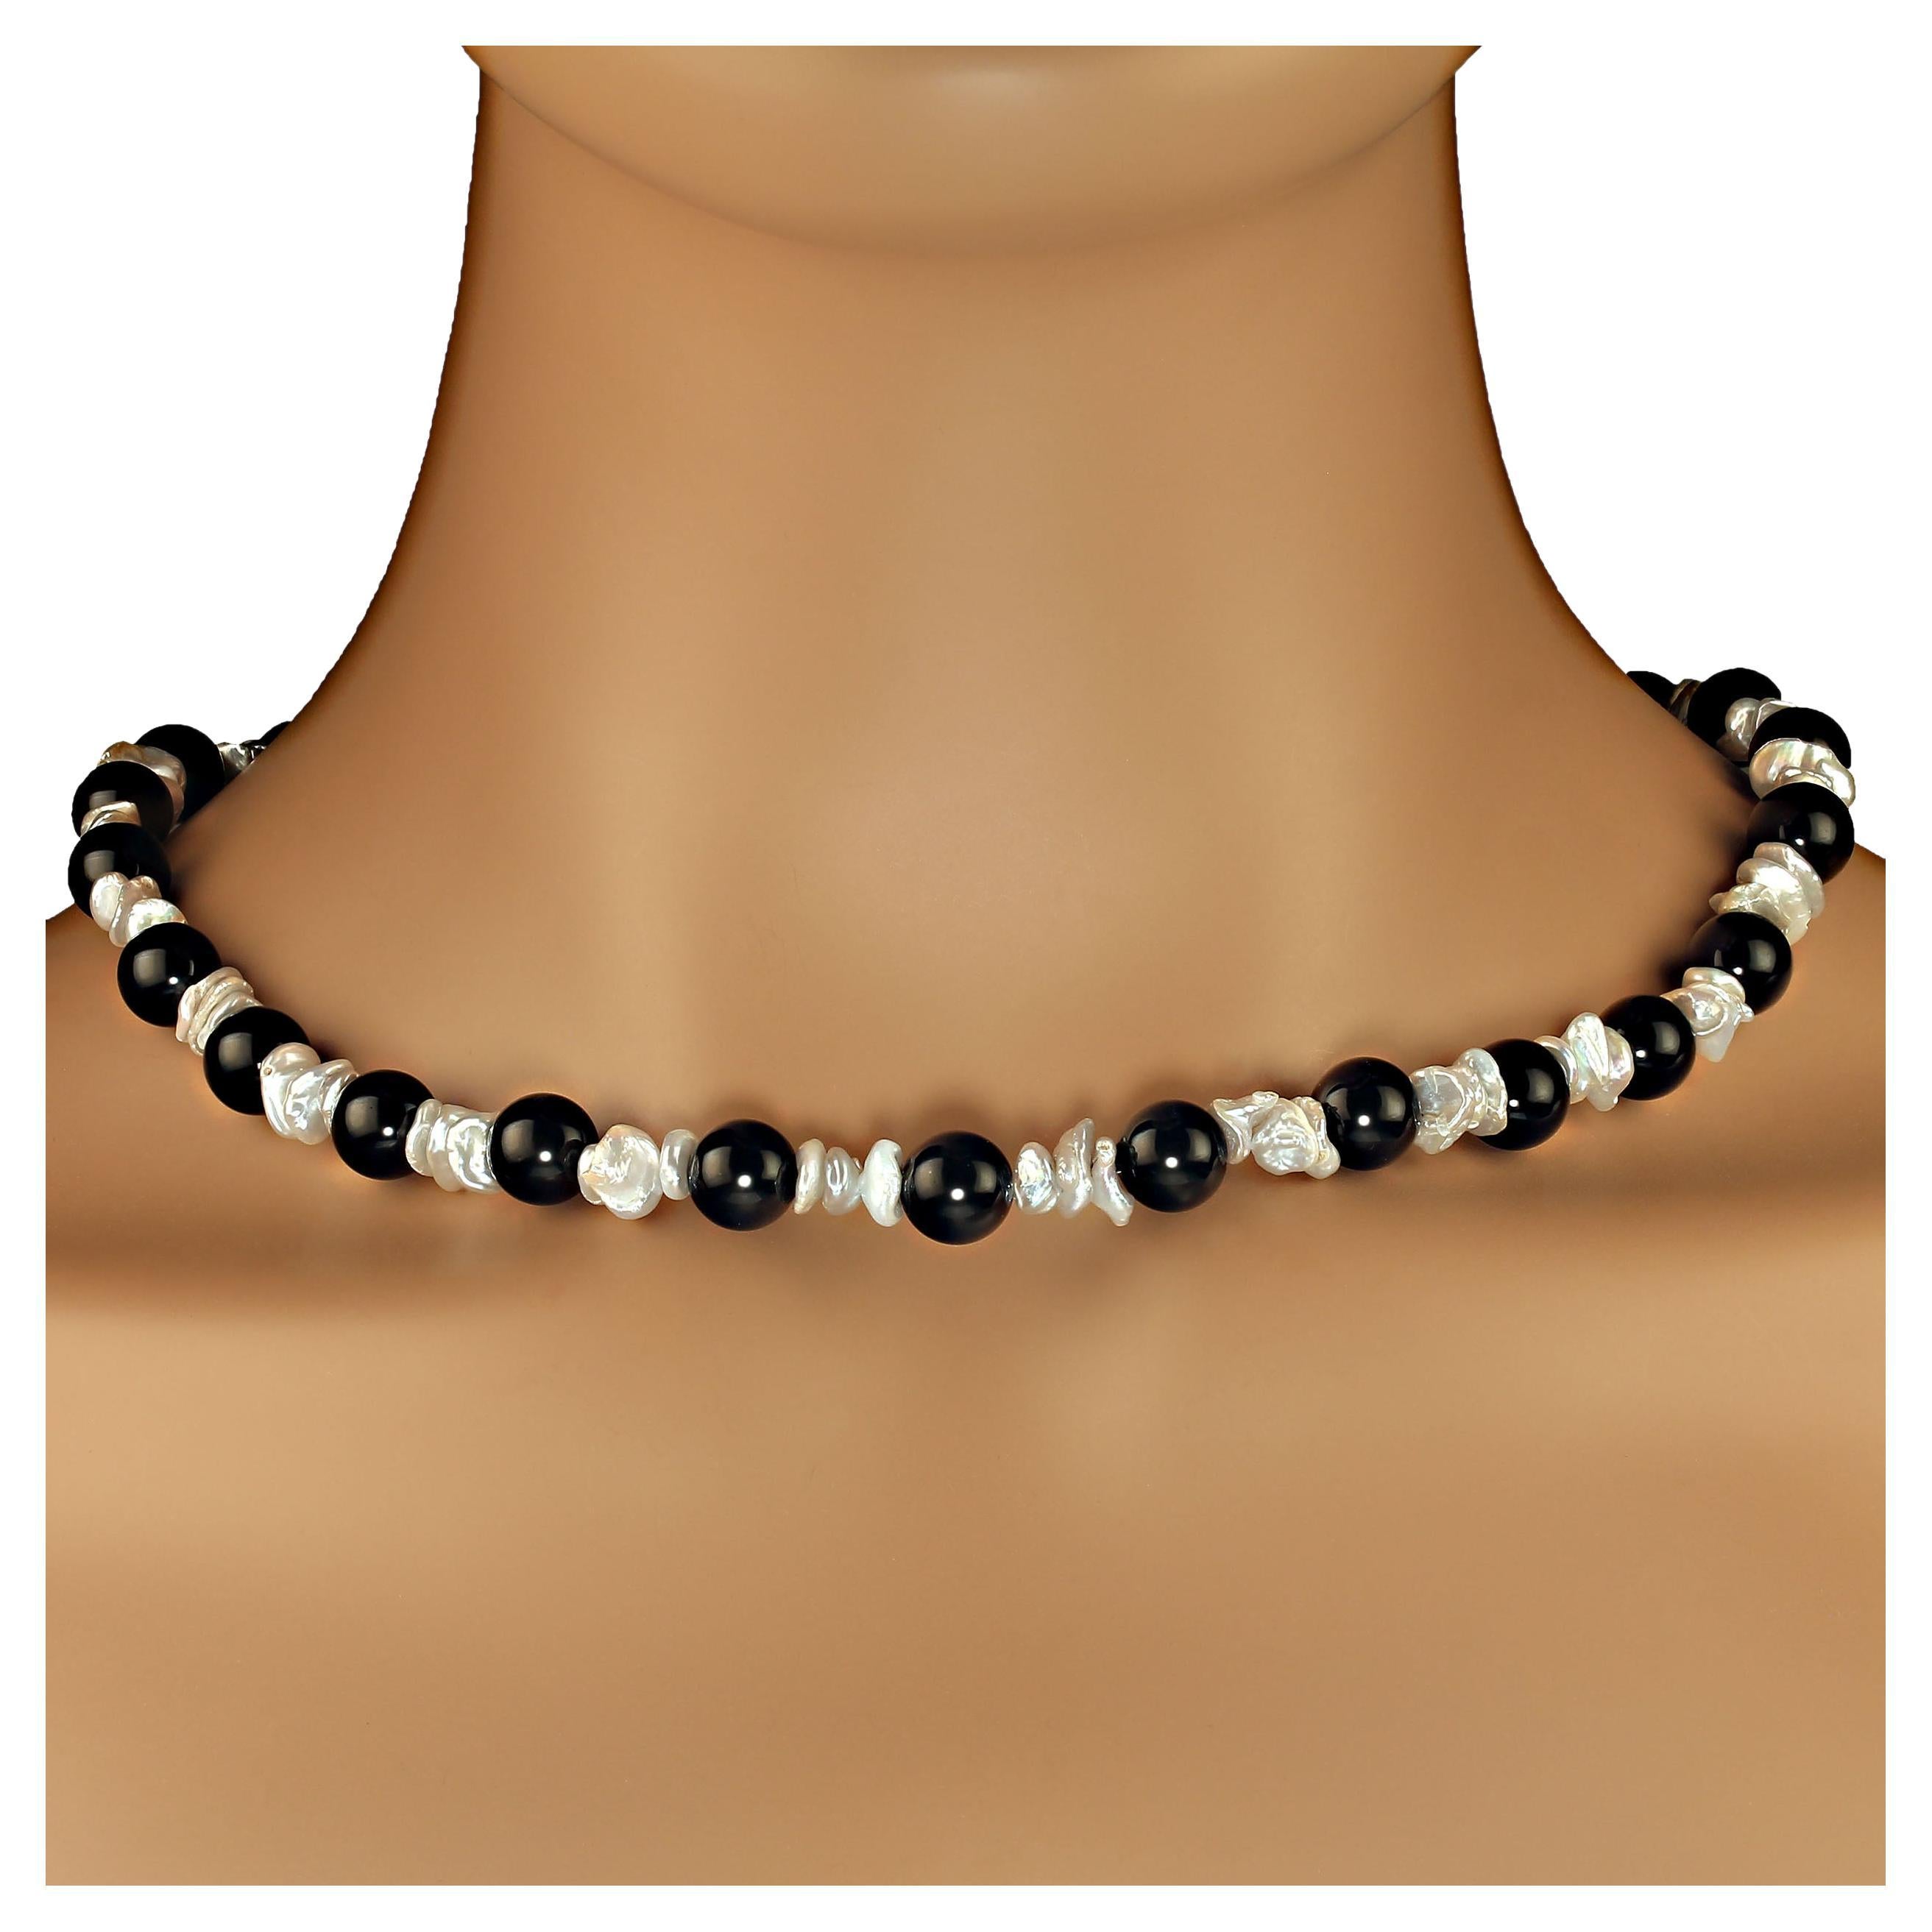 Artisan AJD 20 Inch Gray Iridescent Biwa Pearl and Black Onyx necklace Great Gift! For Sale